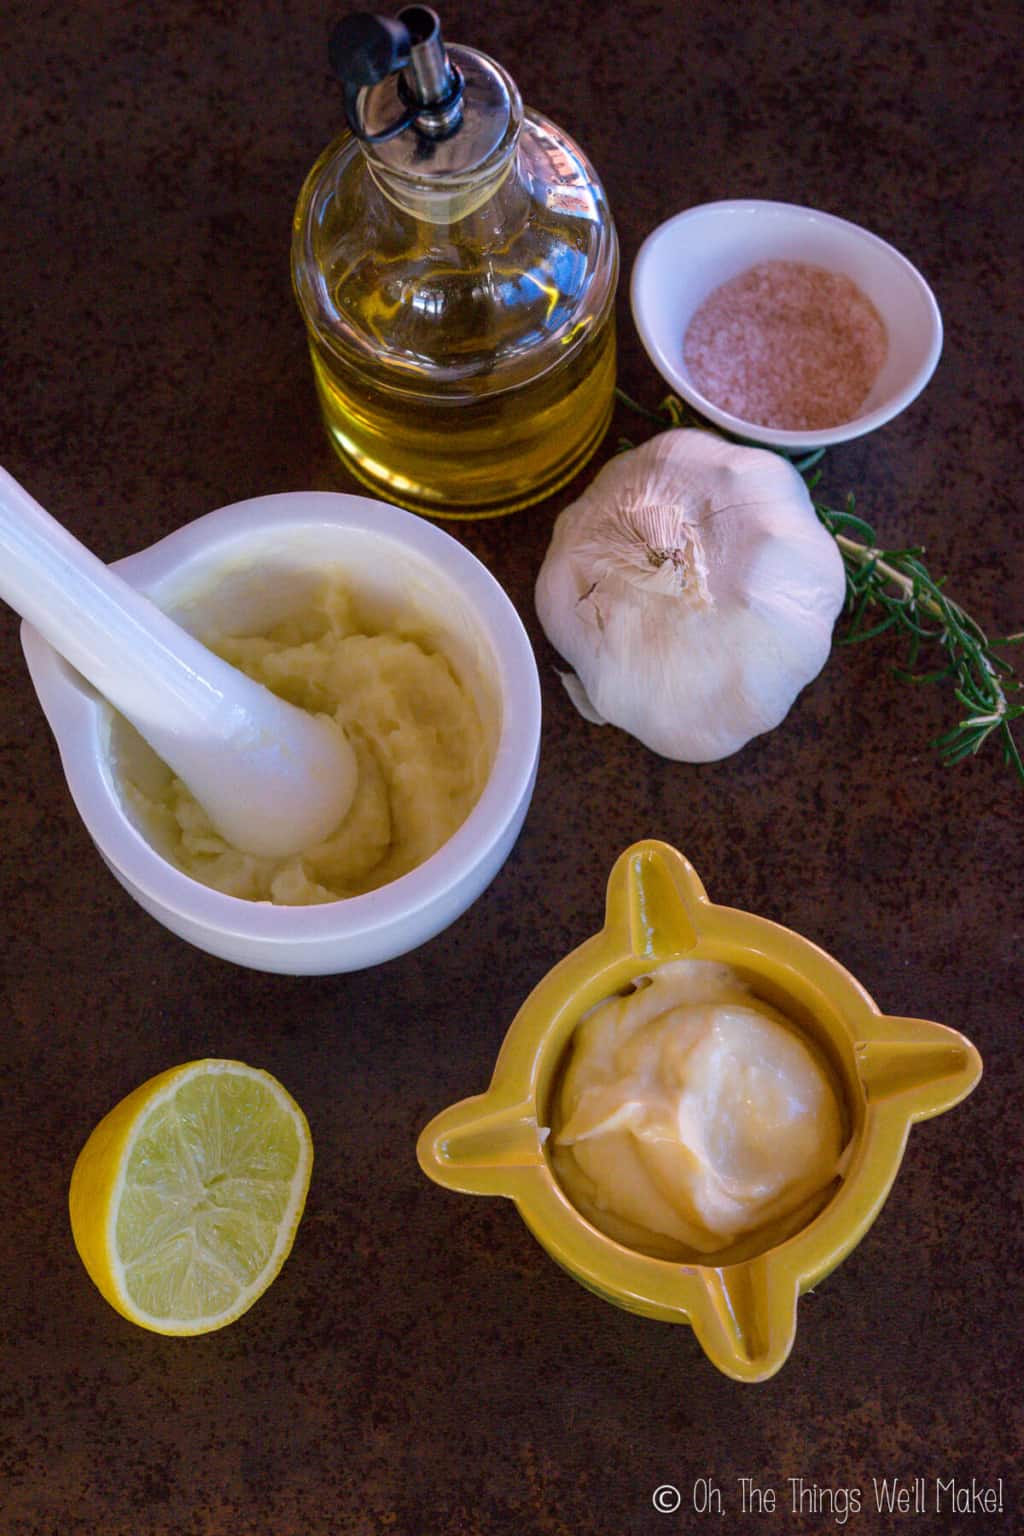 Traditional aioli in a white mortar next to a garlic head, bottle of oil, and a small bowl of pink salt. At the bottom is modern aioli in a yellow mortar with a sliced lemon on its left side.